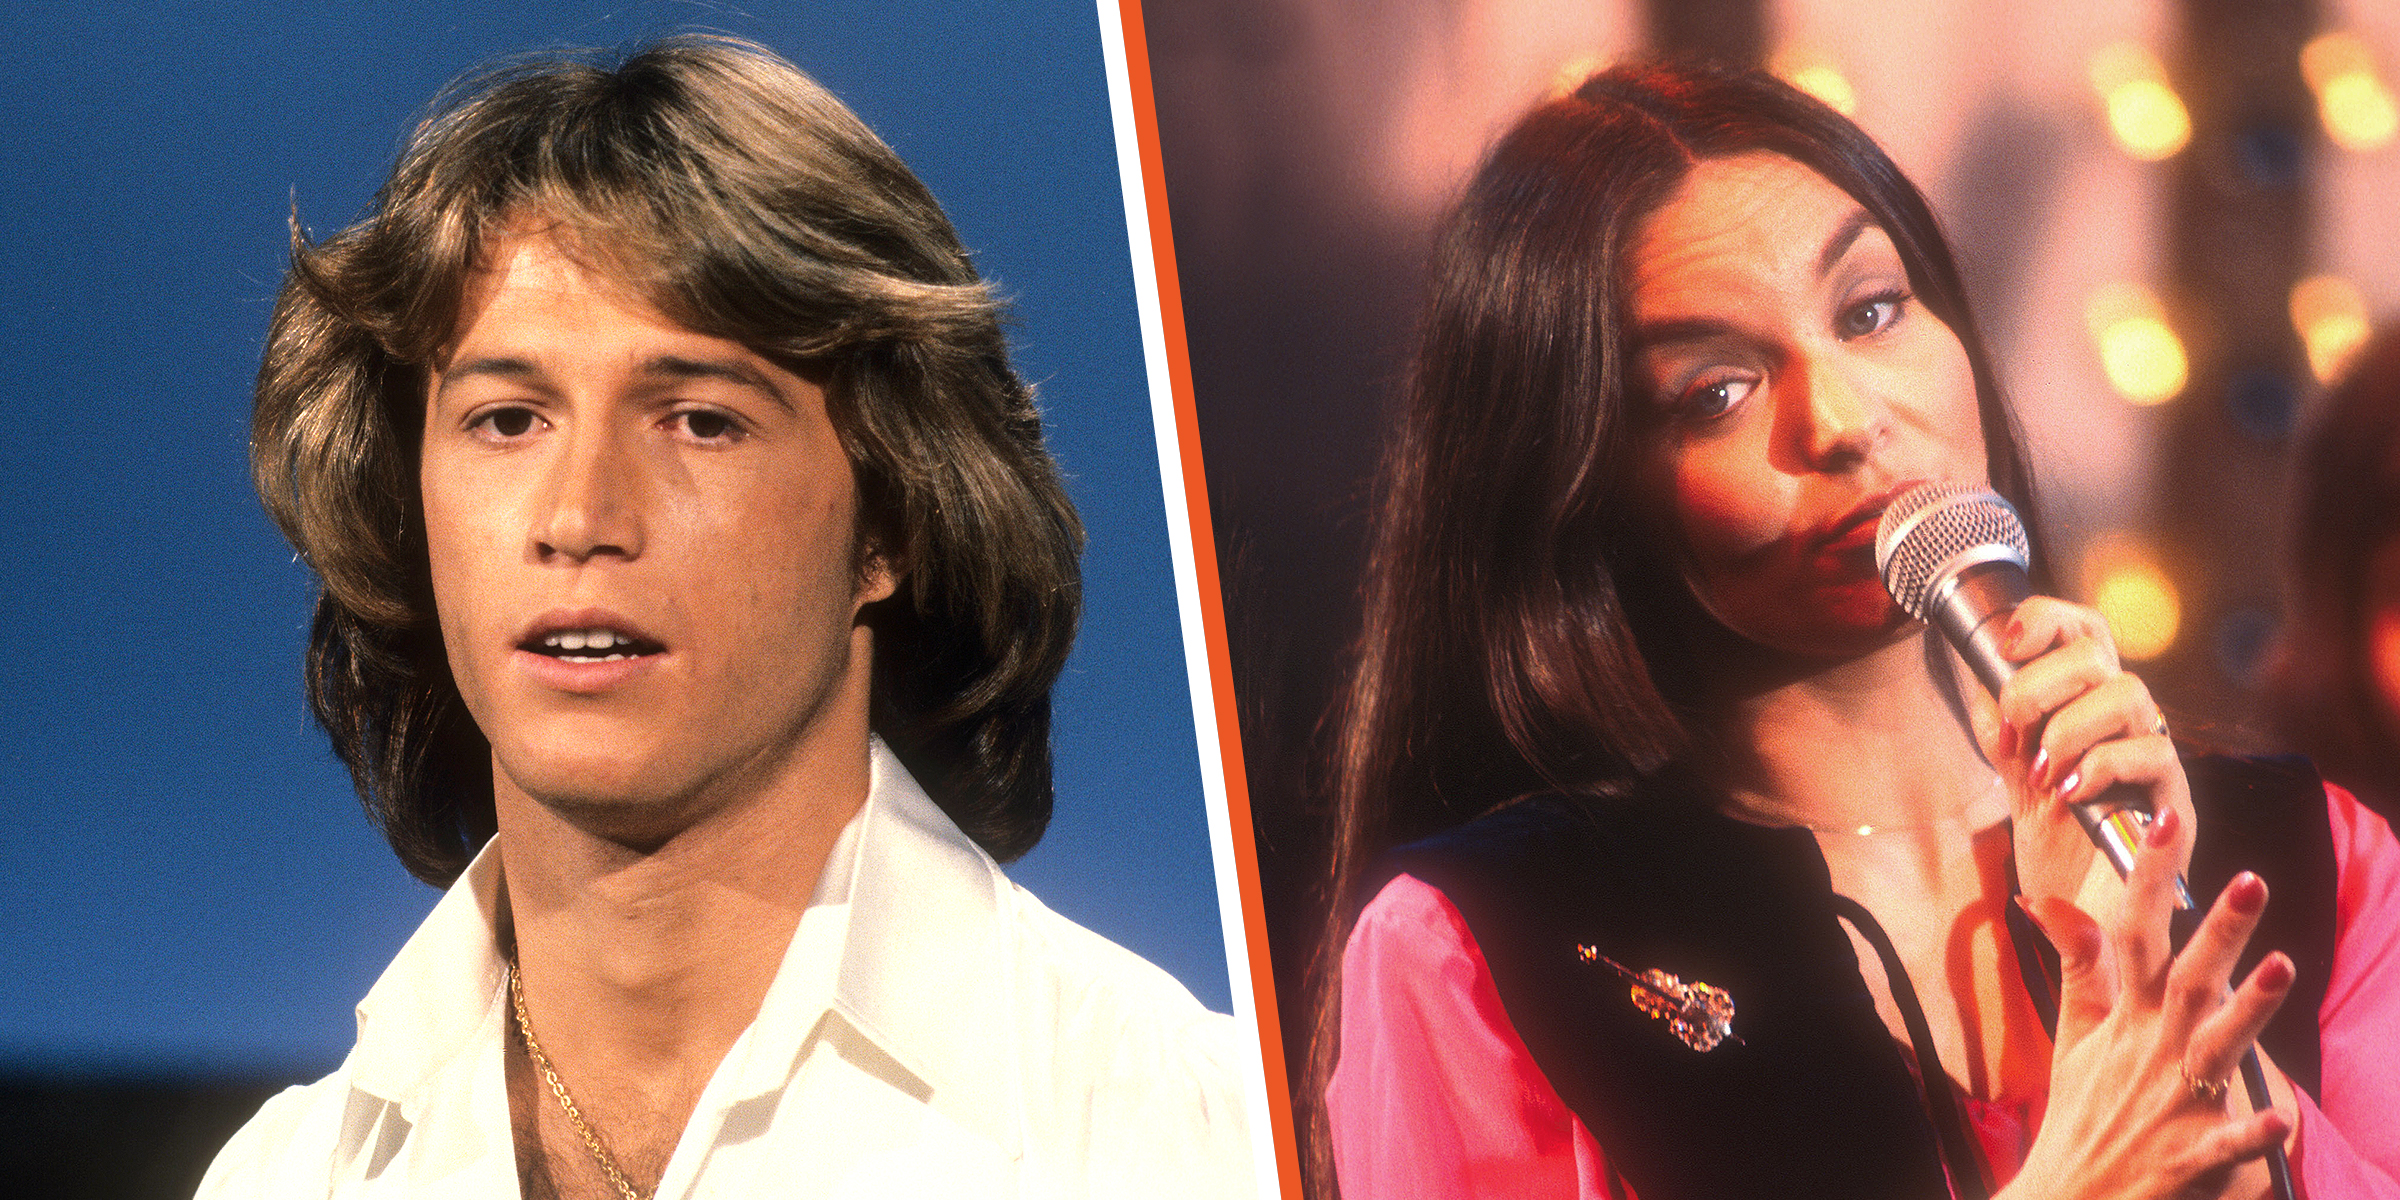 Andy Gibb et Crystal Gayle | Source : Getty Images